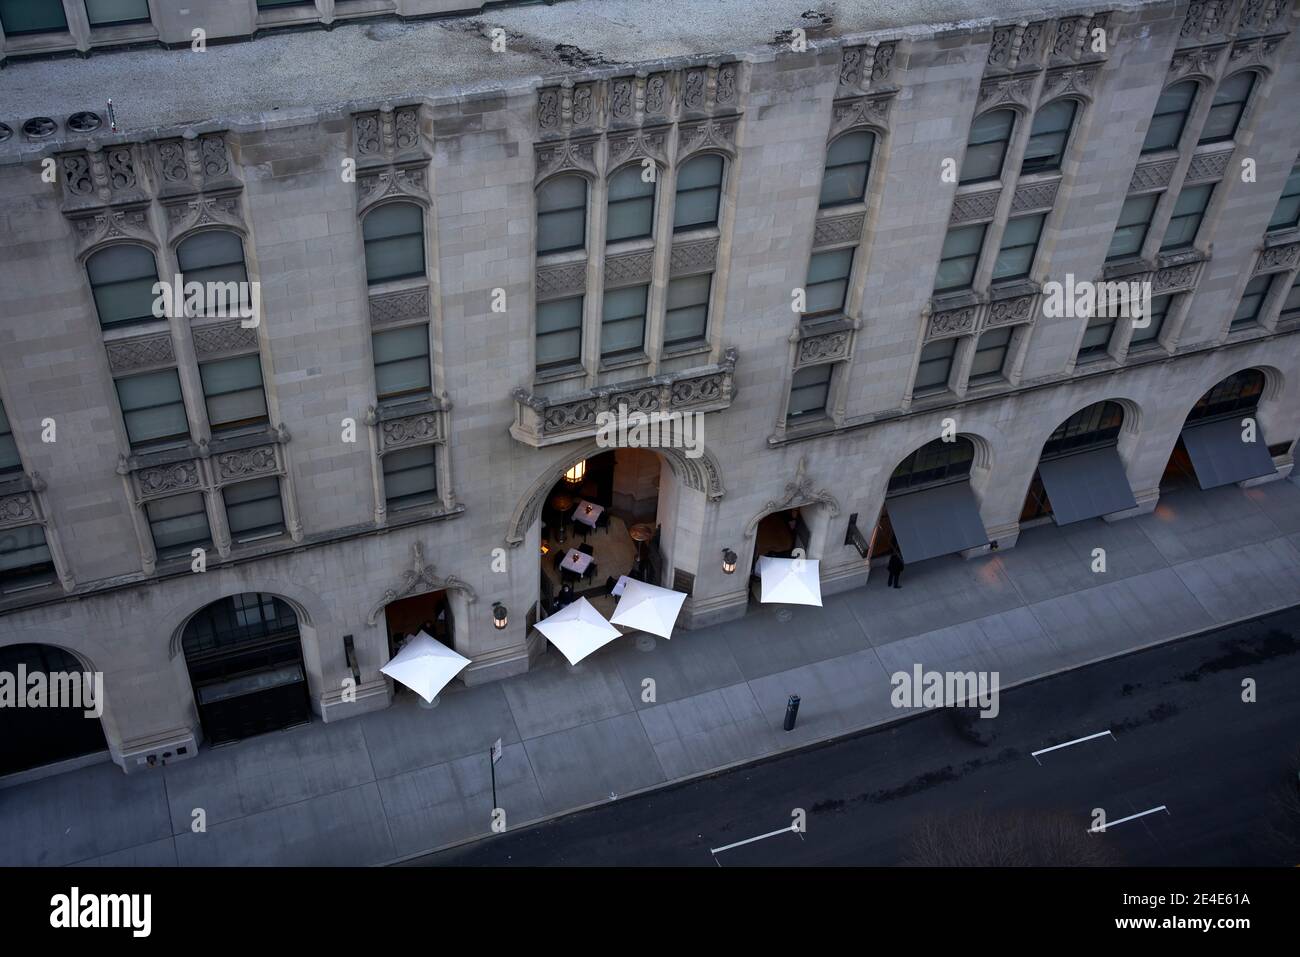 Looking down on a restaurant with outdoor dining on a sidewalk in New York City. Stock Photo